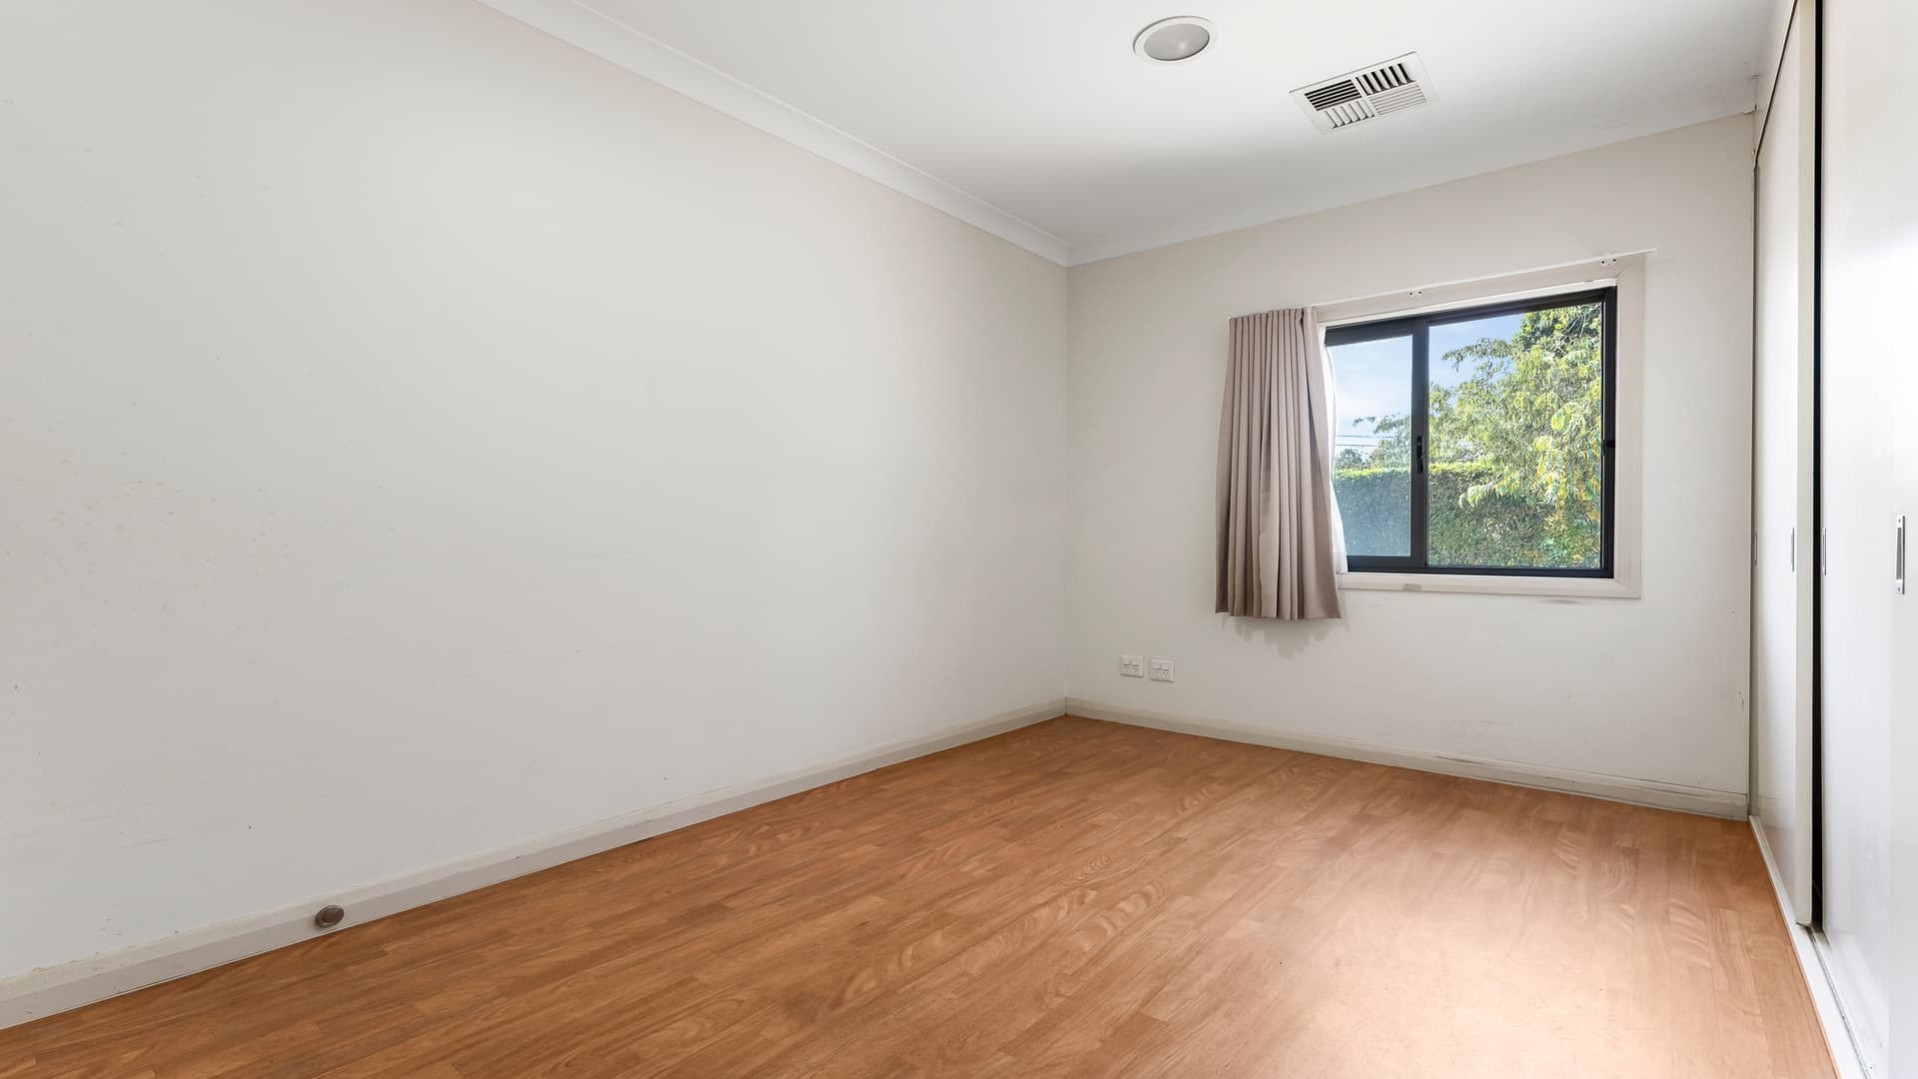 Vacant bedroom with hard wood flooring and window.